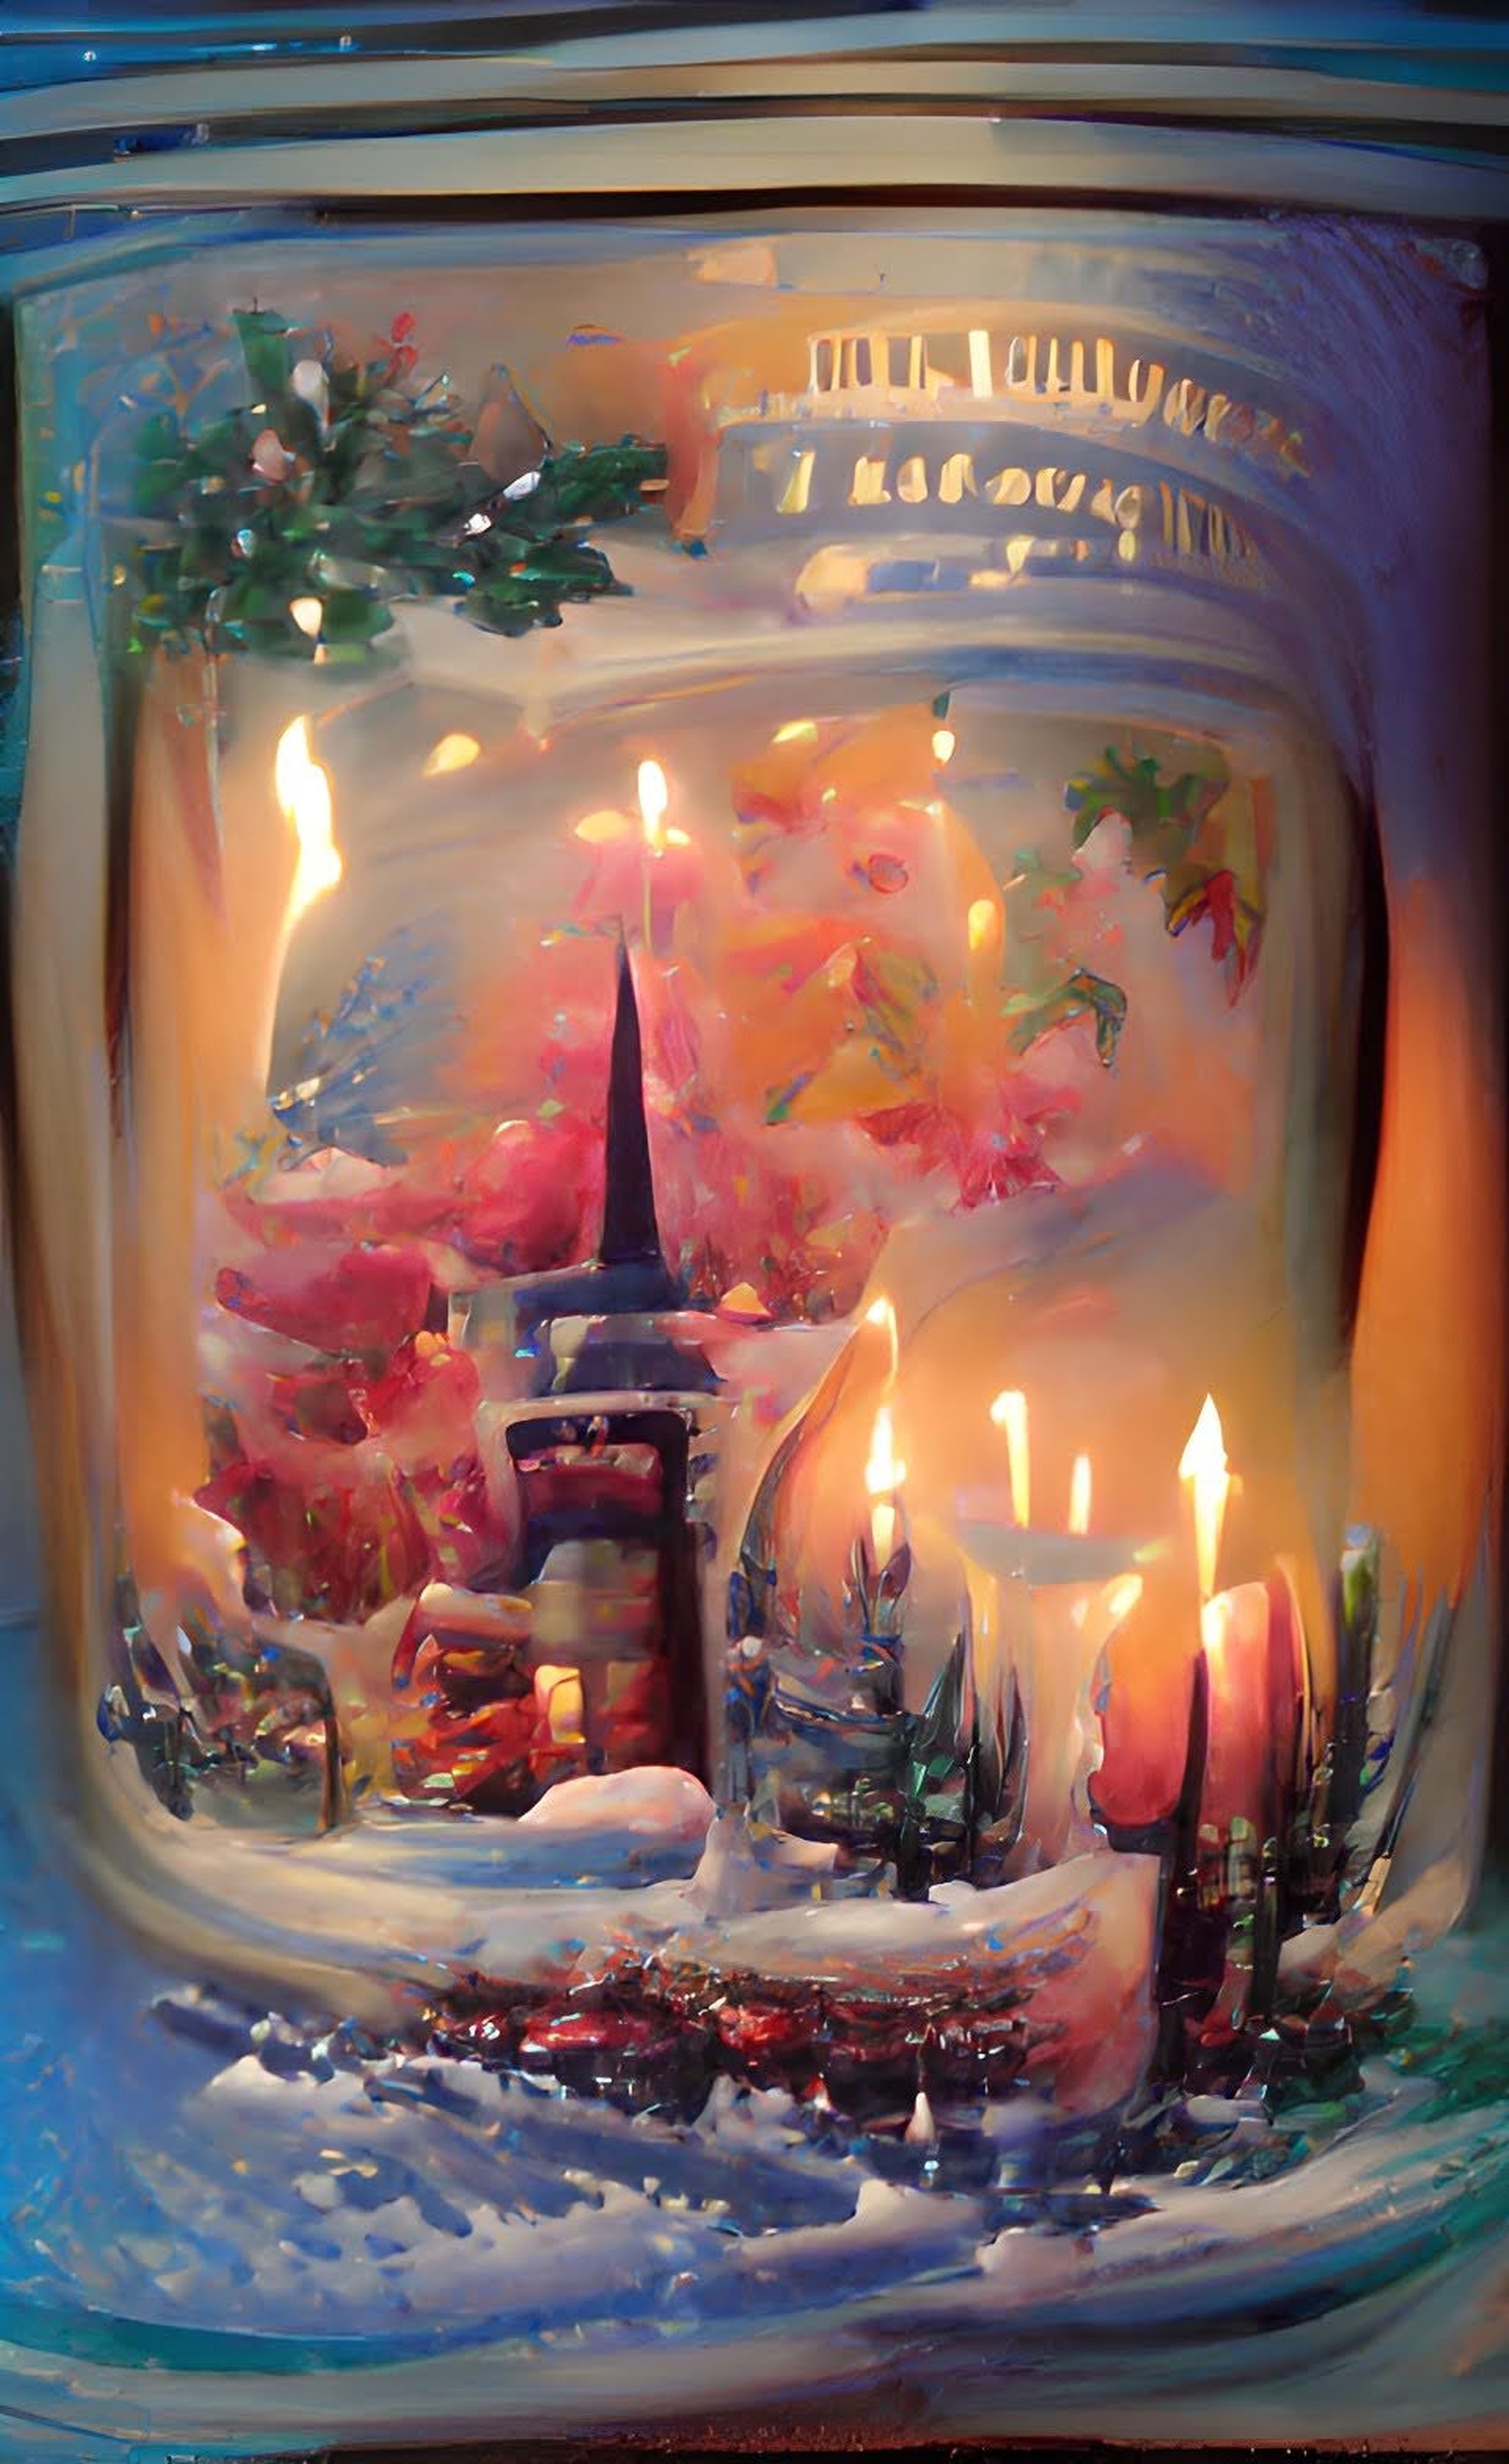 Light a candle on a cold day